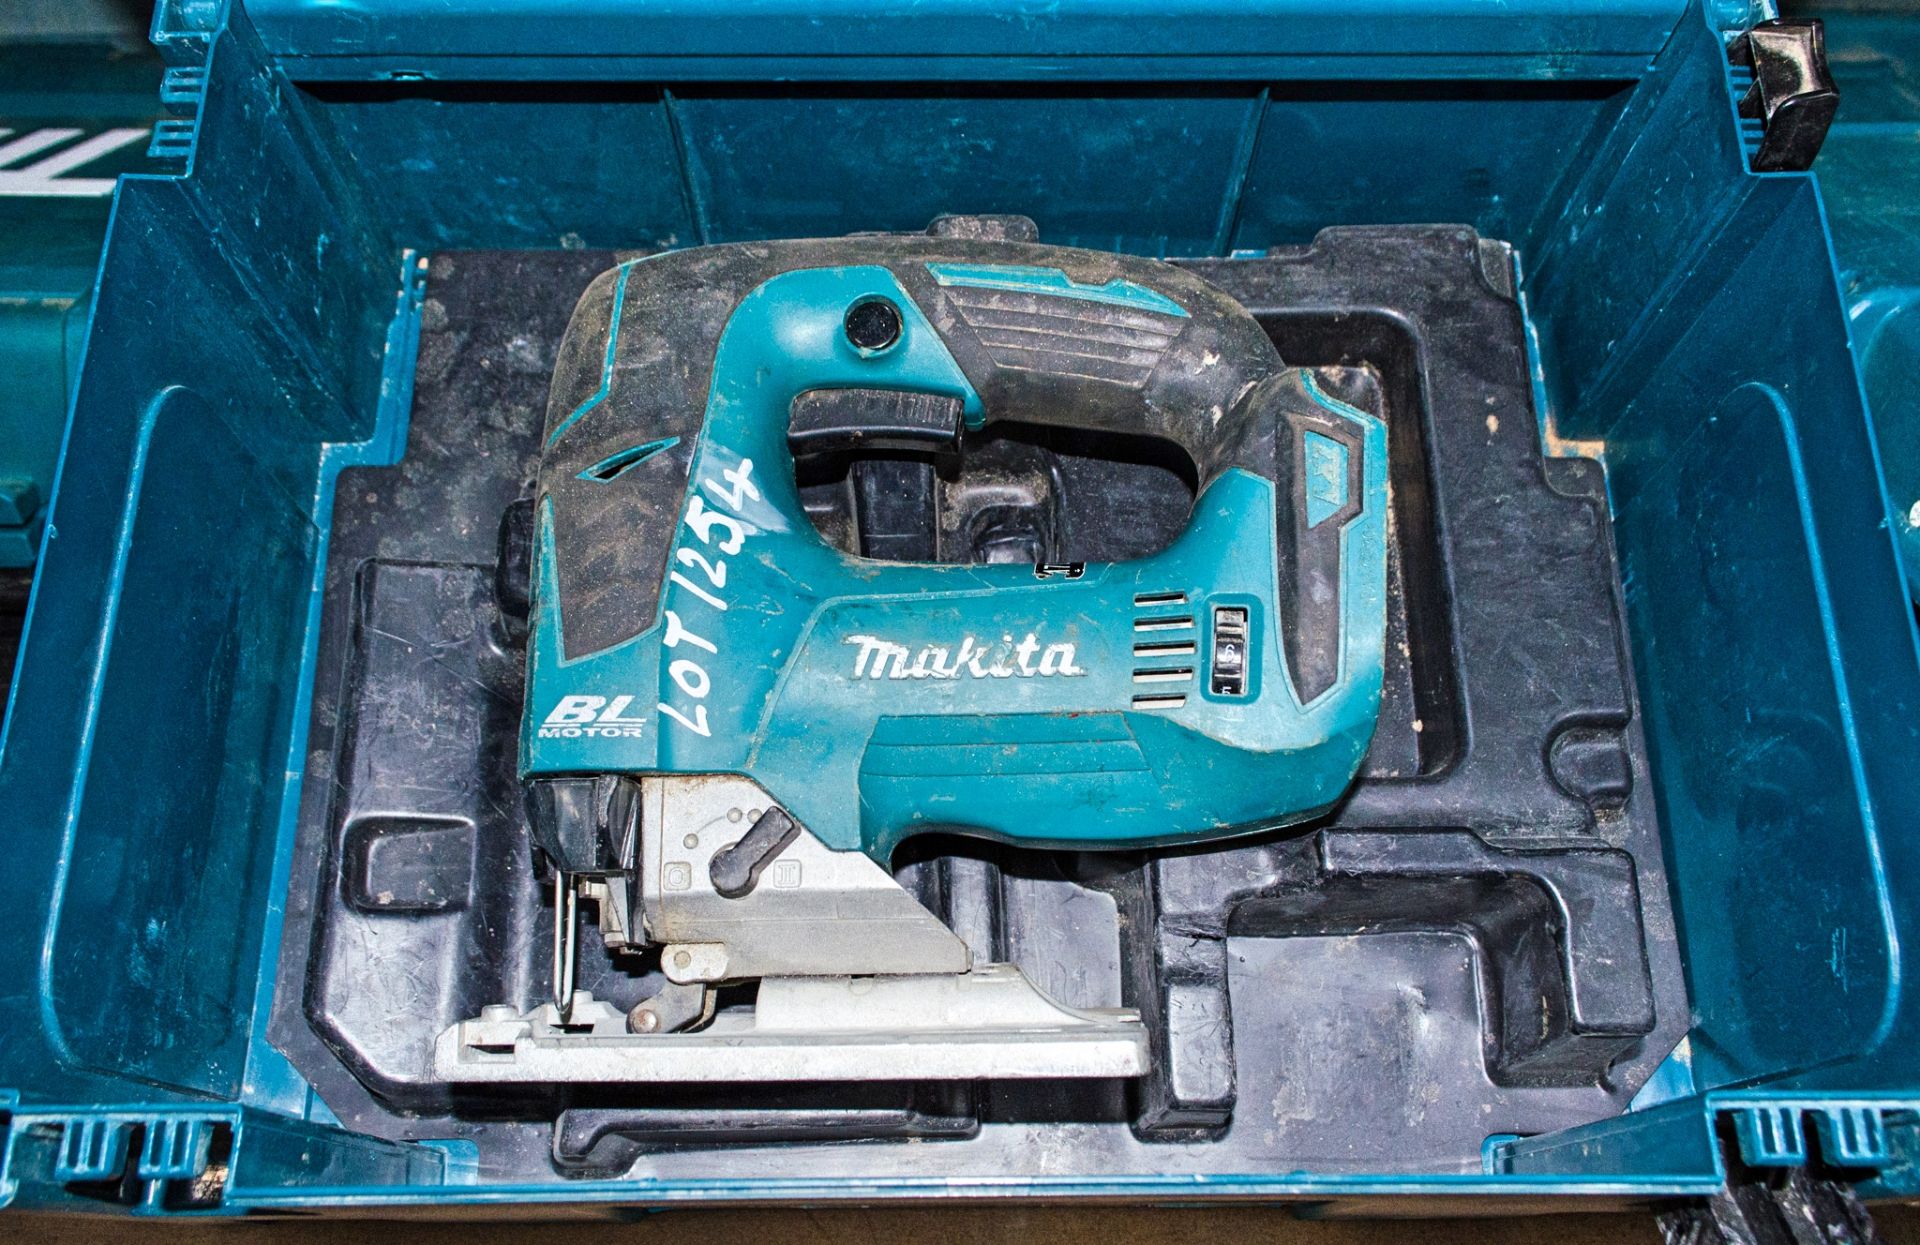 Makita DJV182 18v cordless jigsaw c/w carry case ** No battery or charger ** 16070853